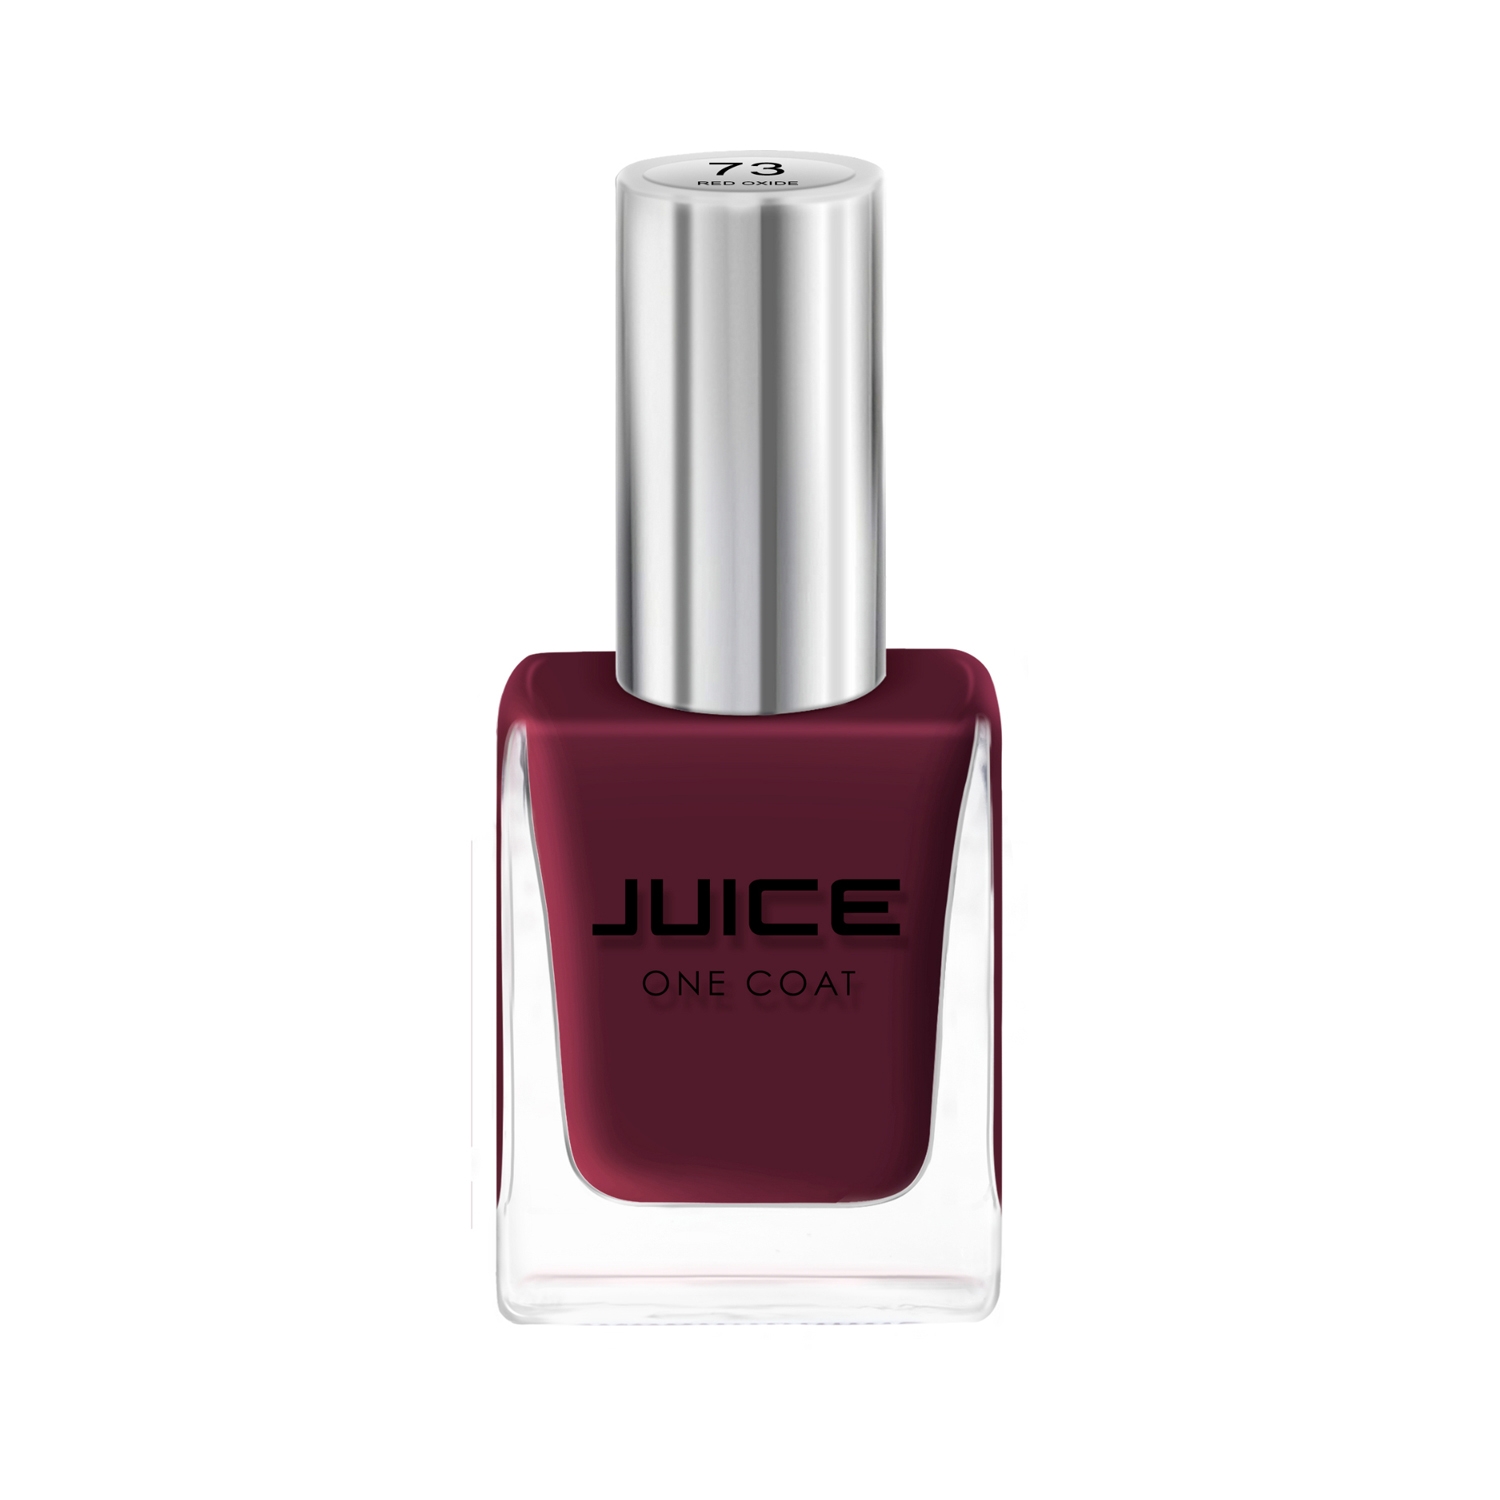 Juice Nail Paint Combo 16 Liquid Silver, Charm Pink, Tickle Me Pink, Sweet  Orange, Charcoal Star - Price in India, Buy Juice Nail Paint Combo 16  Liquid Silver, Charm Pink, Tickle Me